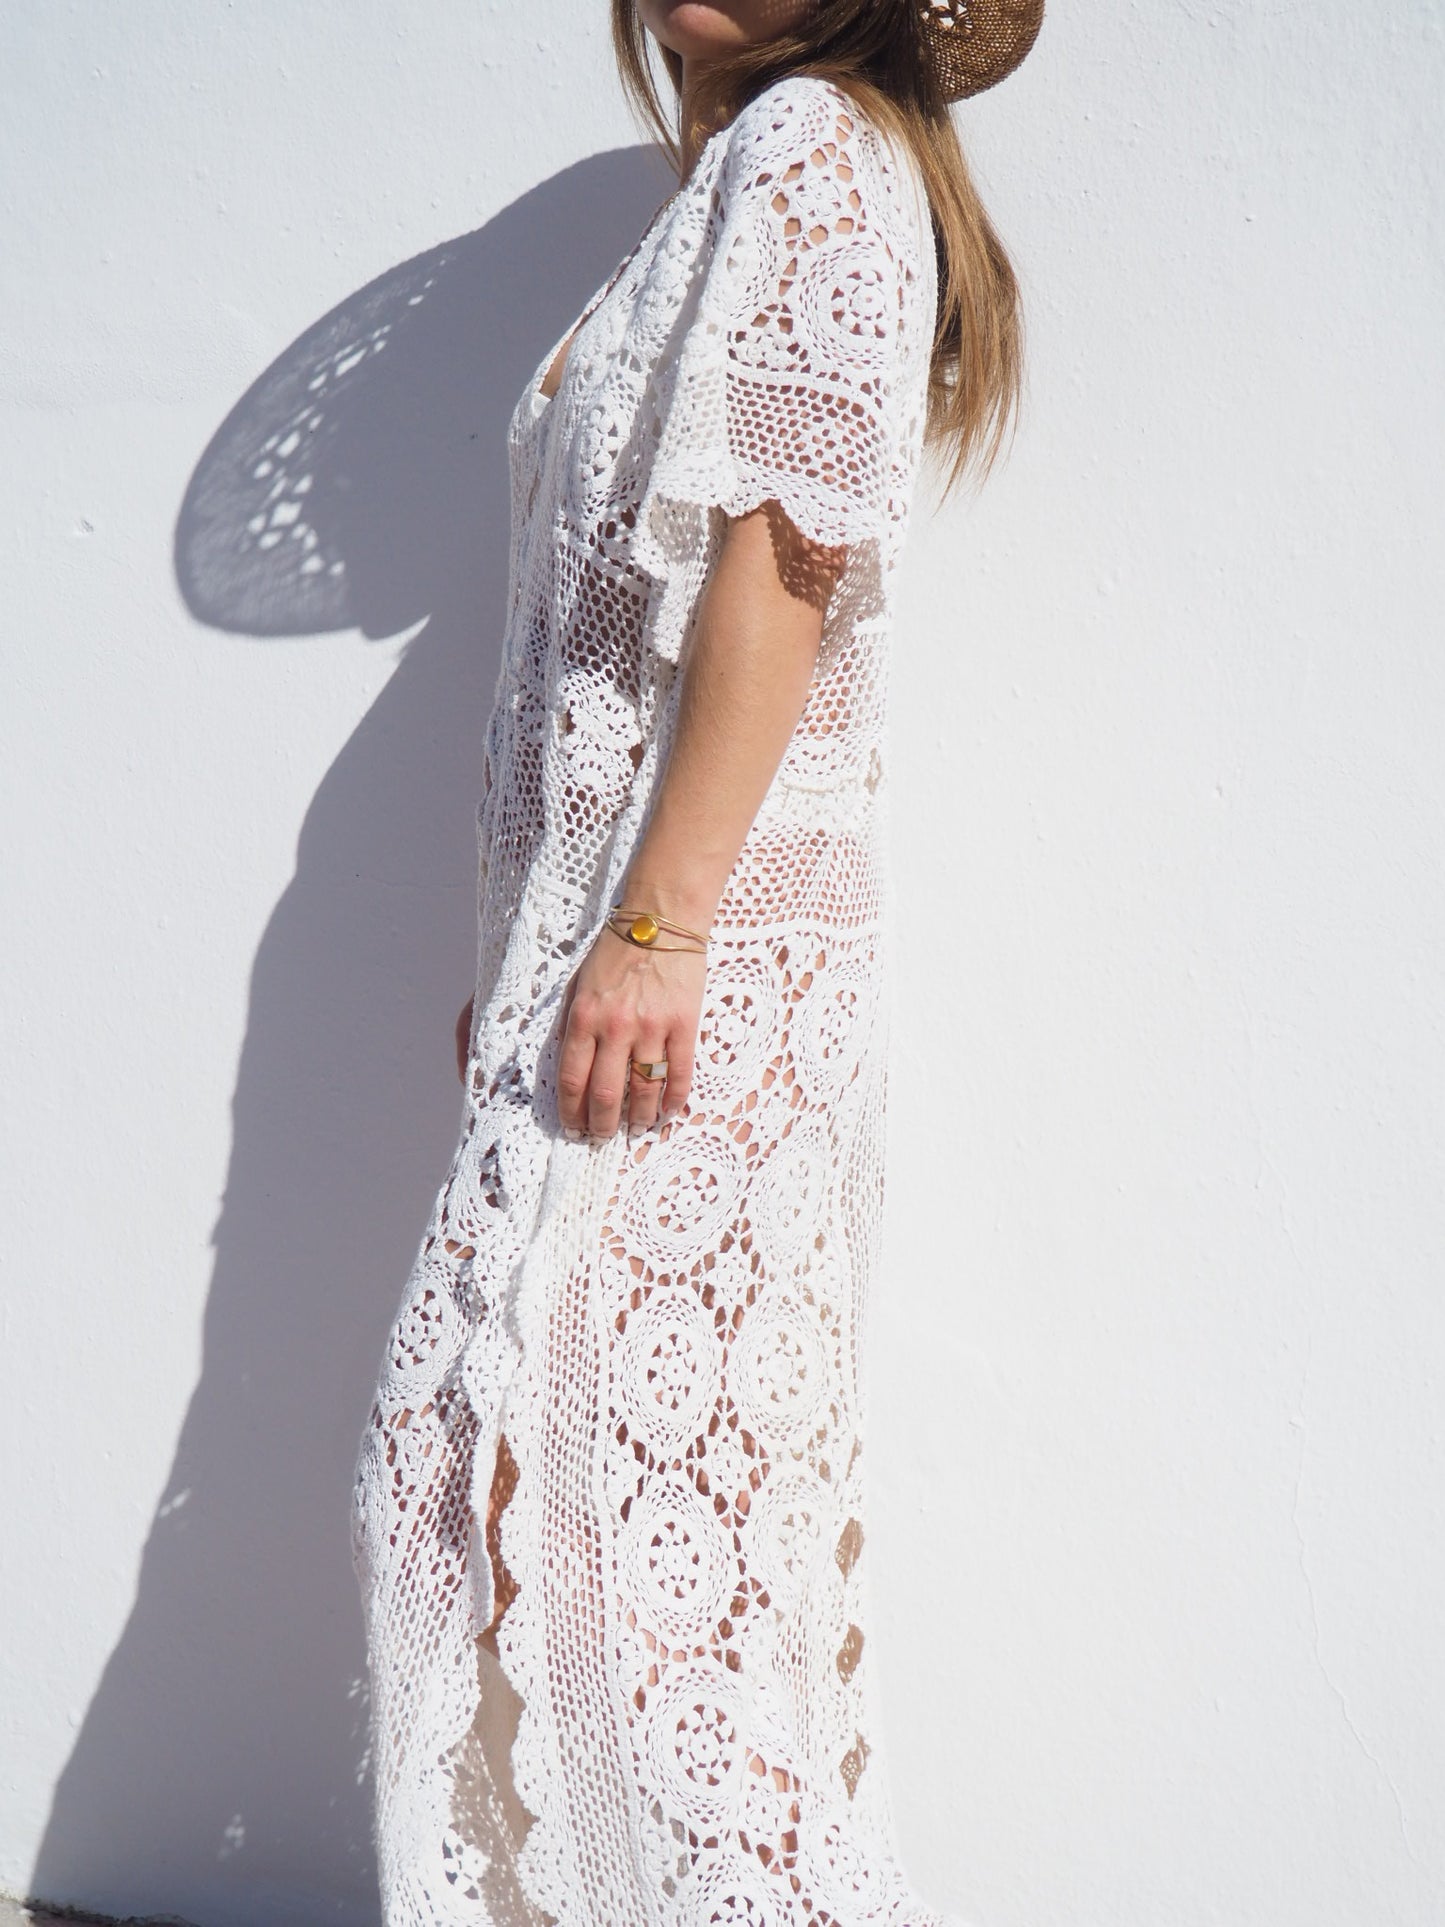 Very cool oversized beach dress hand made crochet up-cycled by Vagabond Ibiza.